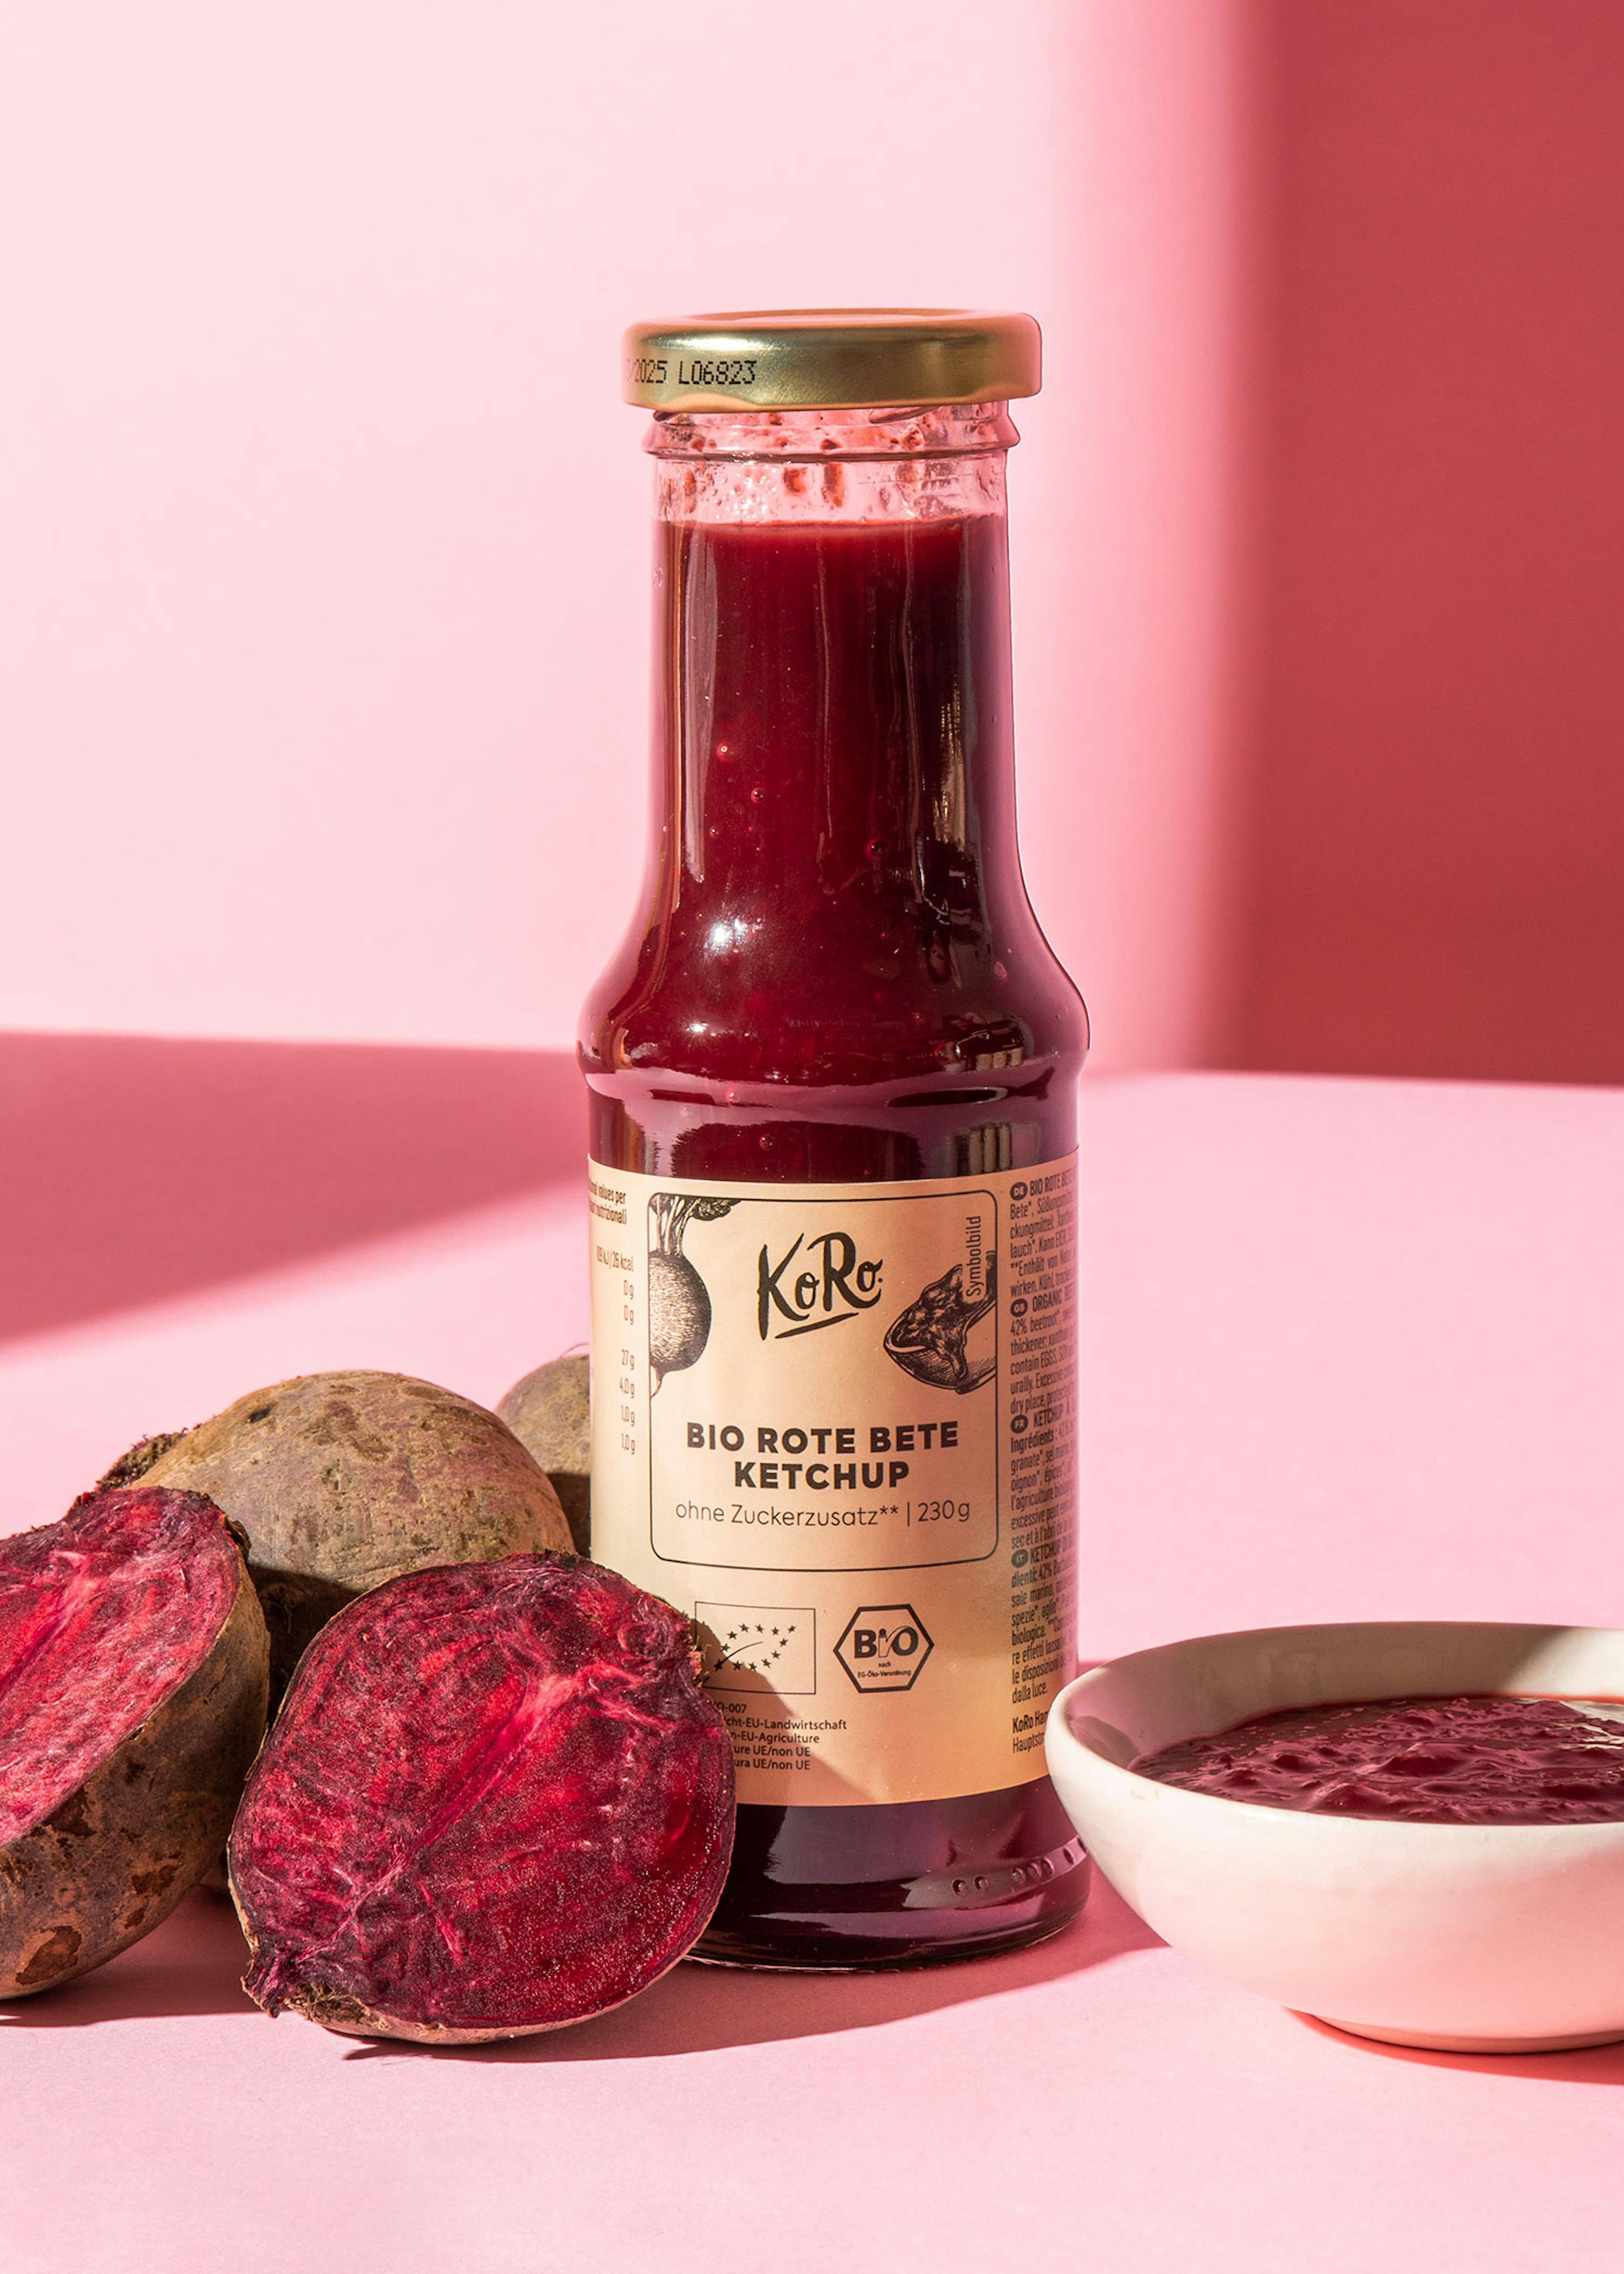 The tomato has competition: Red beet ketchup